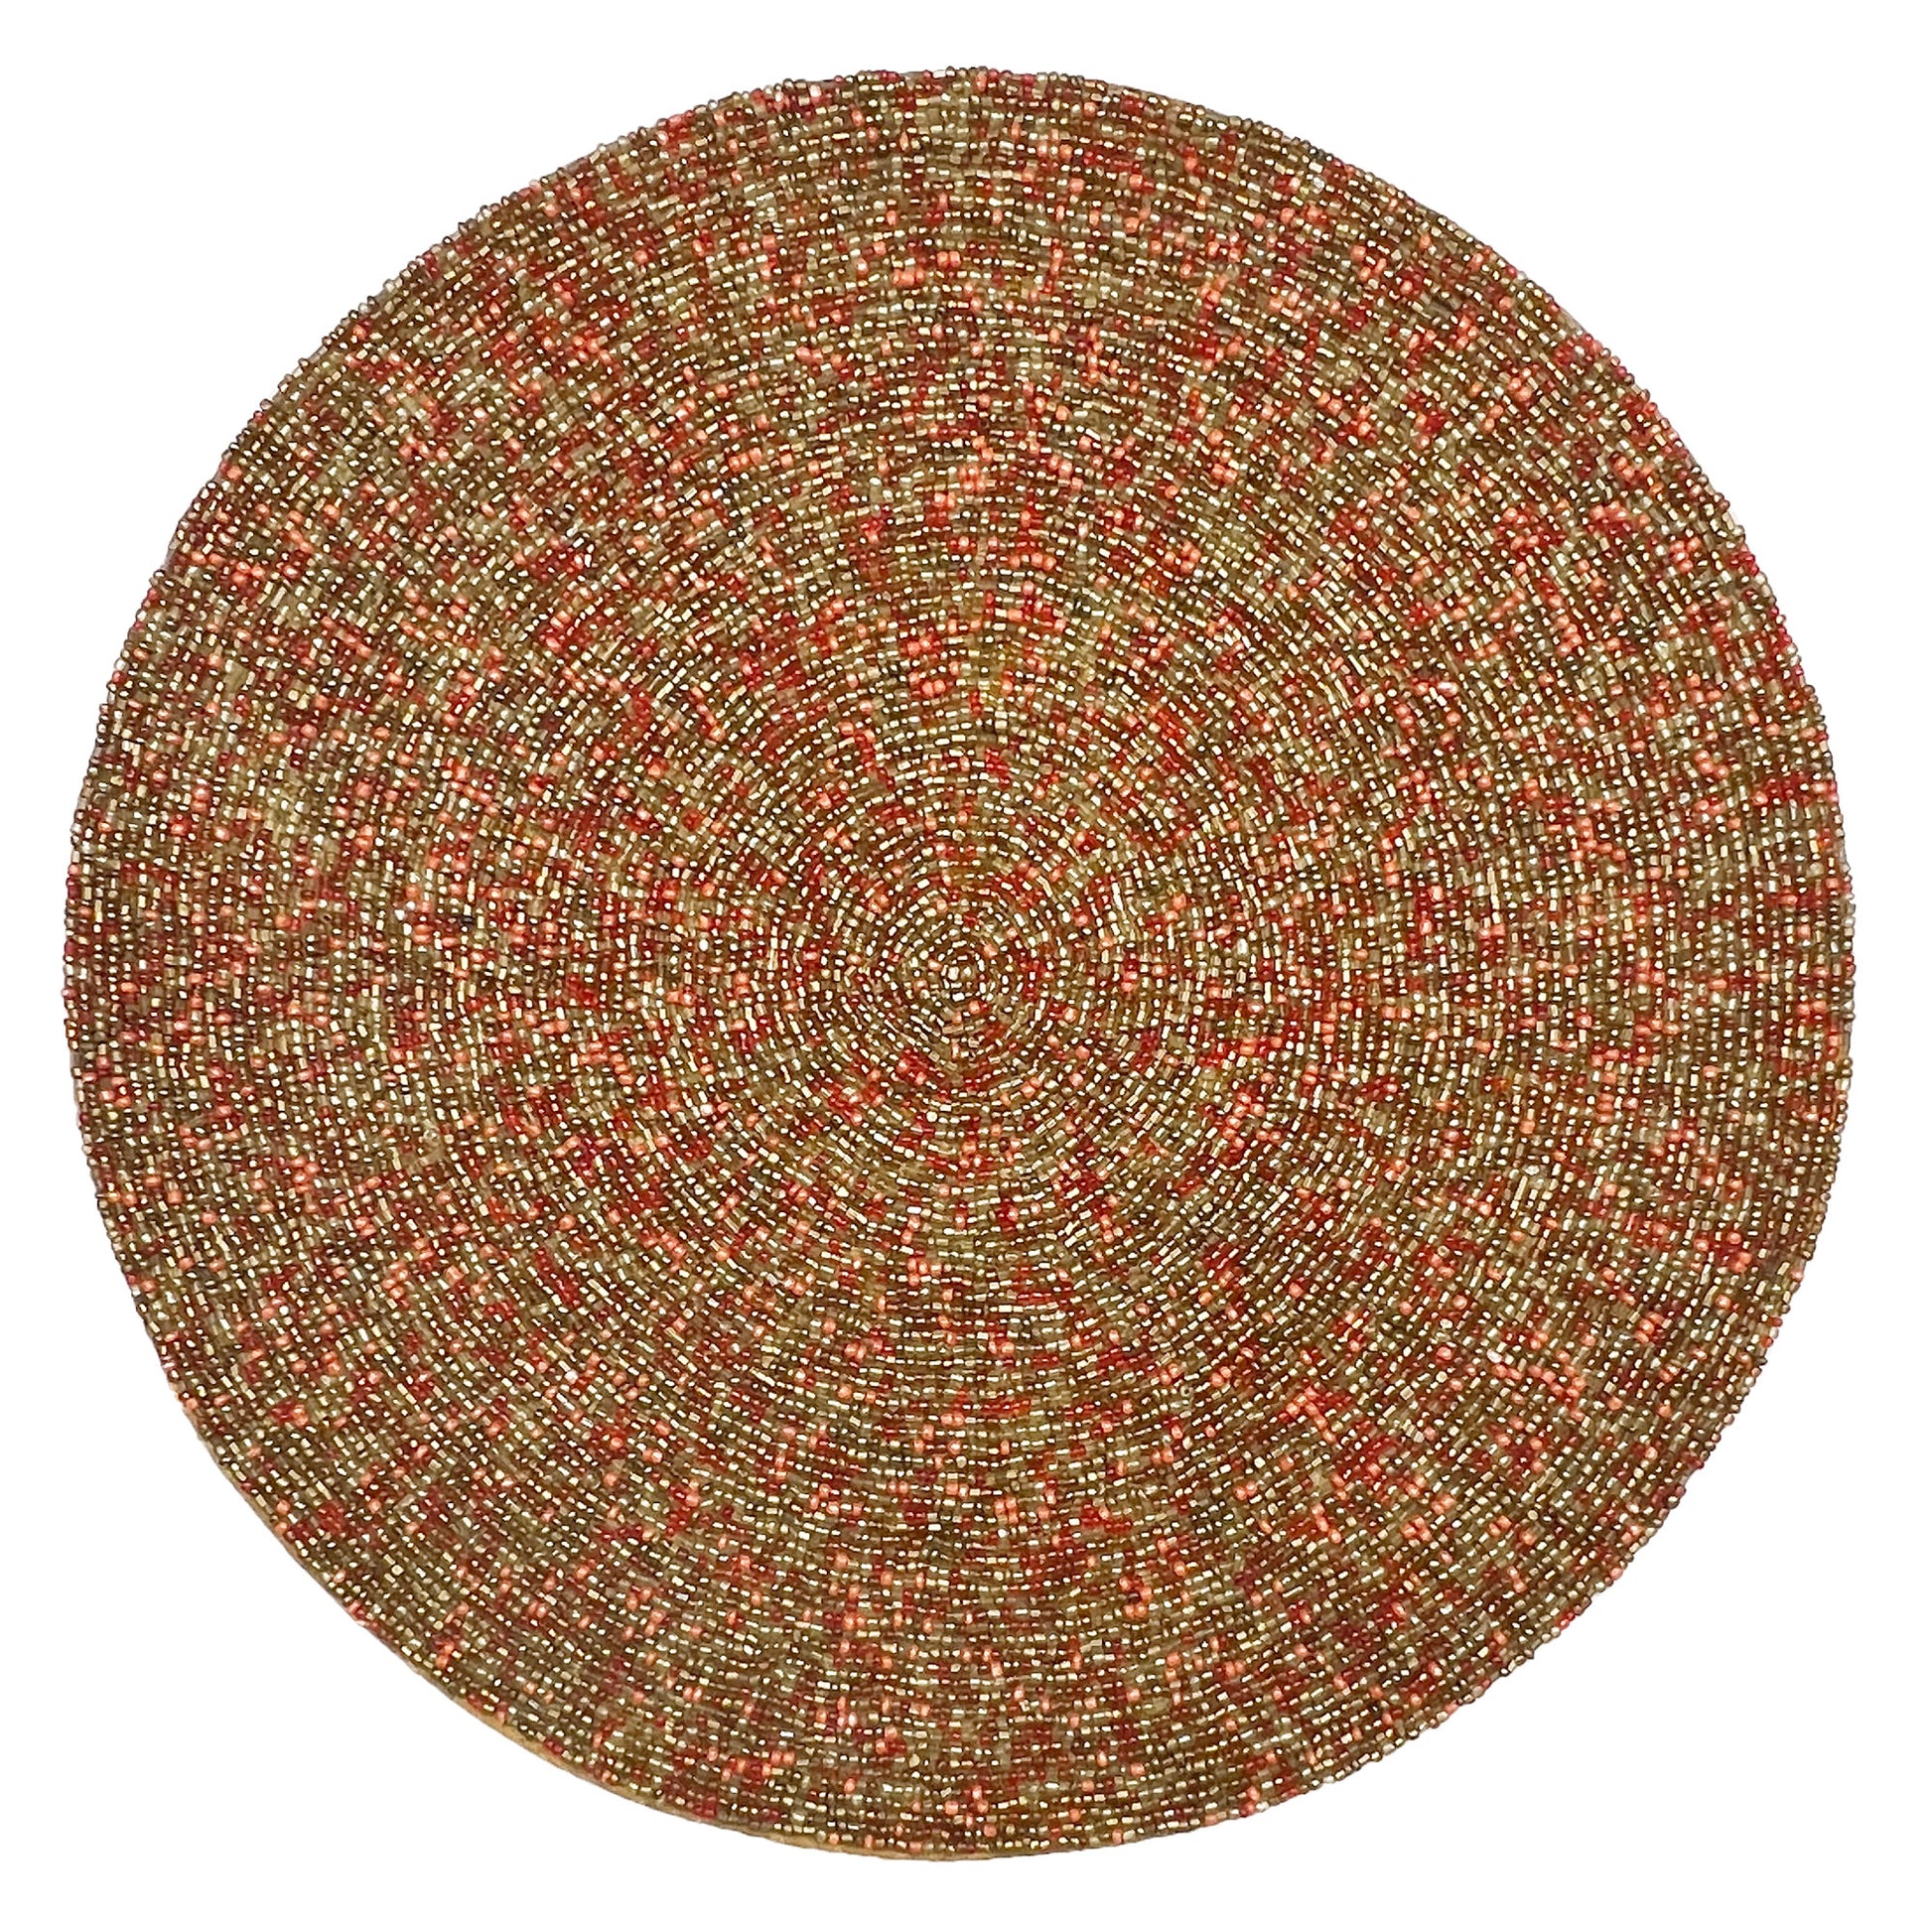 Multicolor-Beaded-Placemats-by-Pier-One-Imports.-Shop-eBargainsAndDeals.com